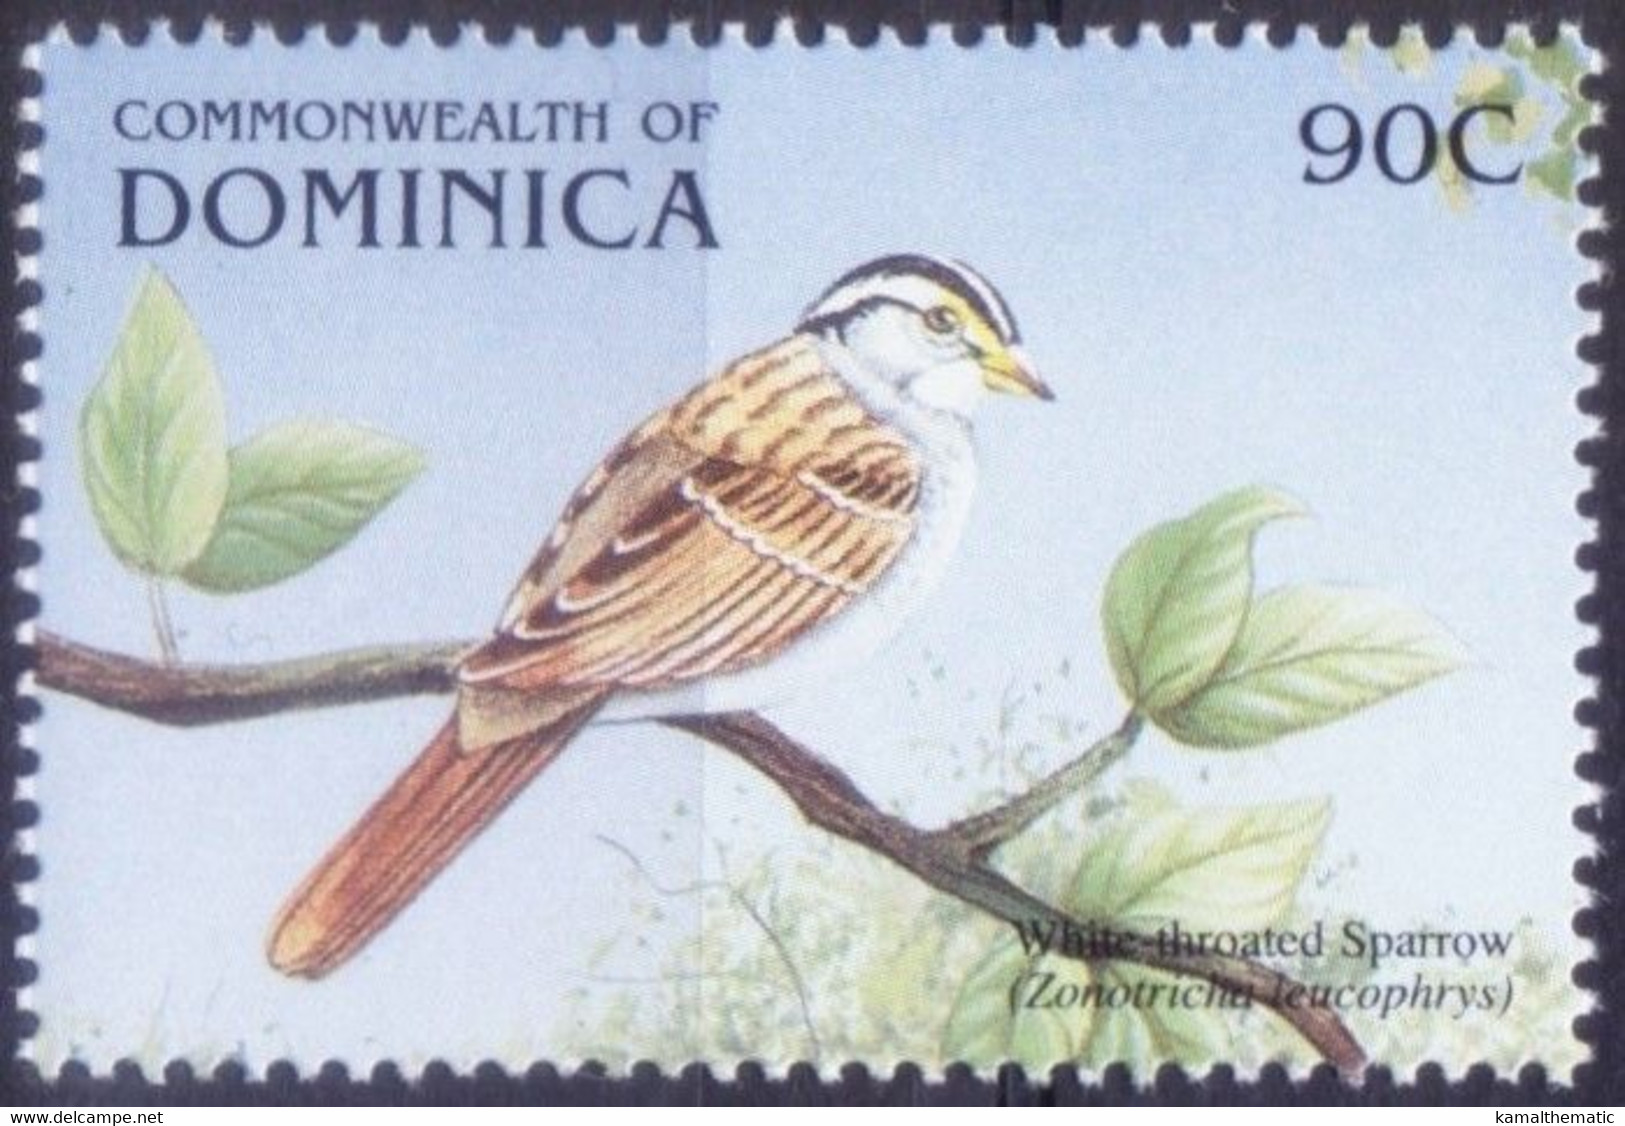 White-throated Sparrow, Birds, Dominica 1999 MNH - Moineaux